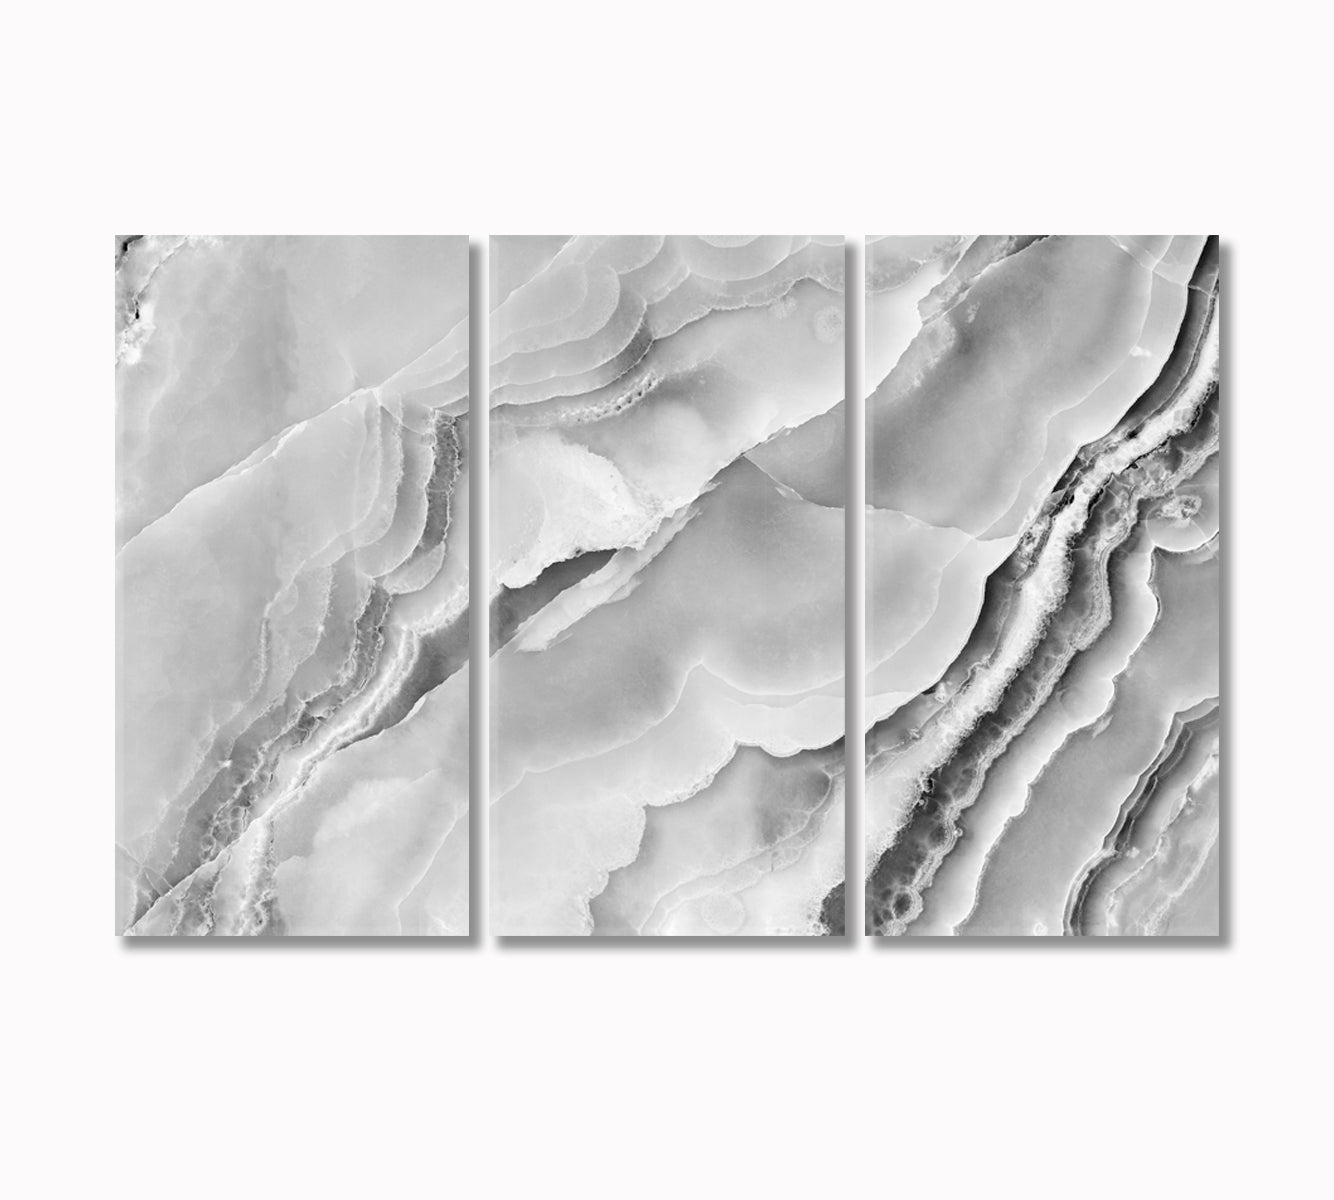 Natural White Marble Abstraction Canvas Print-Canvas Print-CetArt-3 Panels-36x24 inches-CetArt